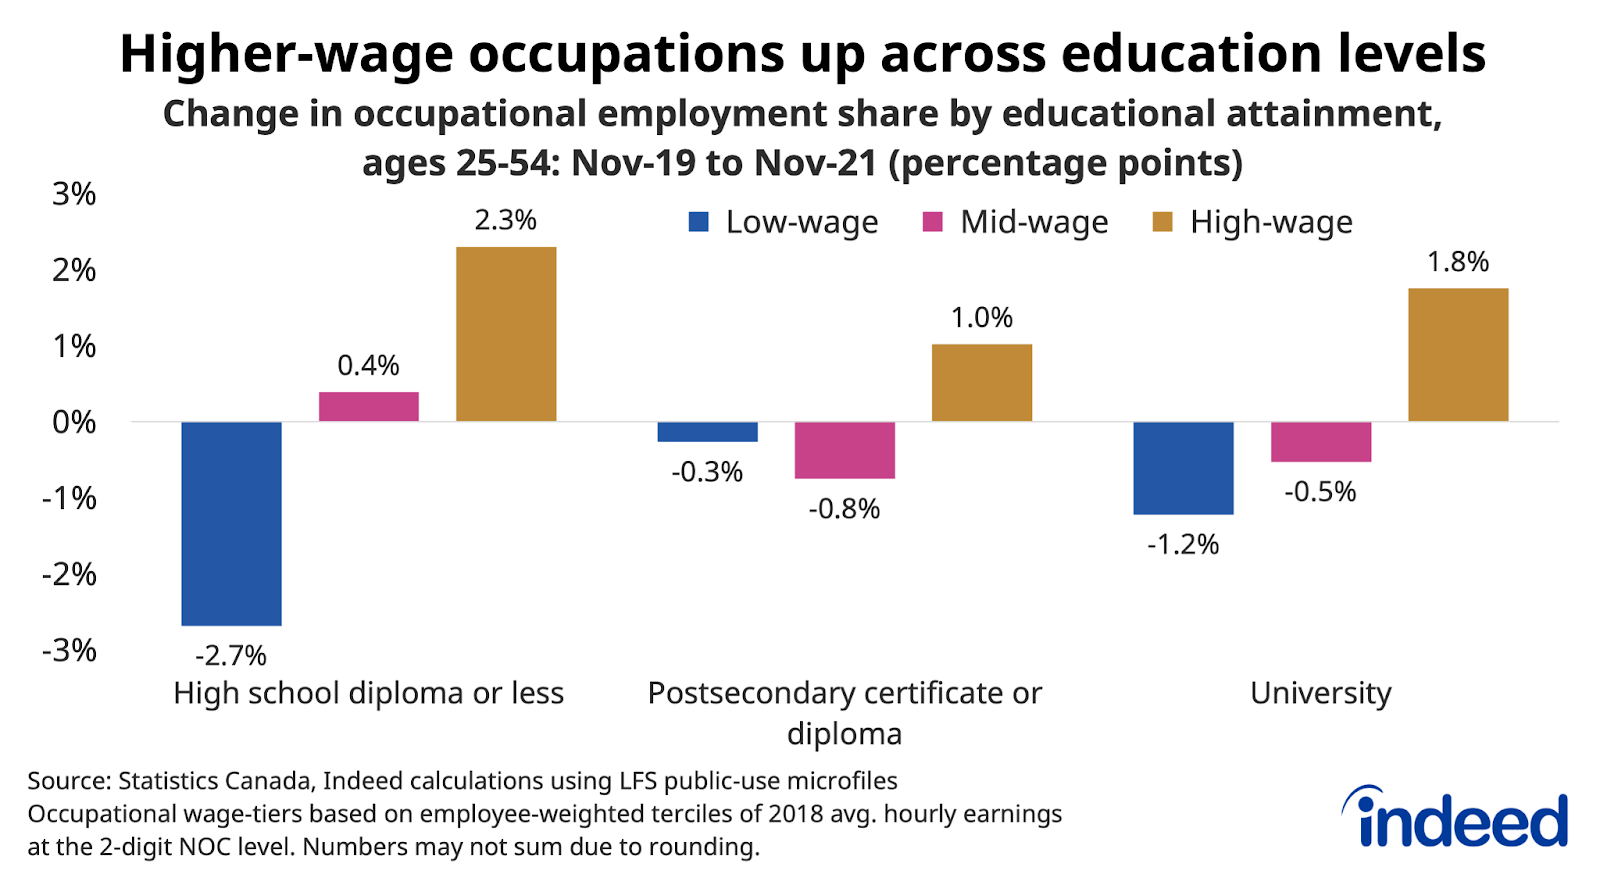 Bar chart titled “Higher-wage occupations up across education levels.”